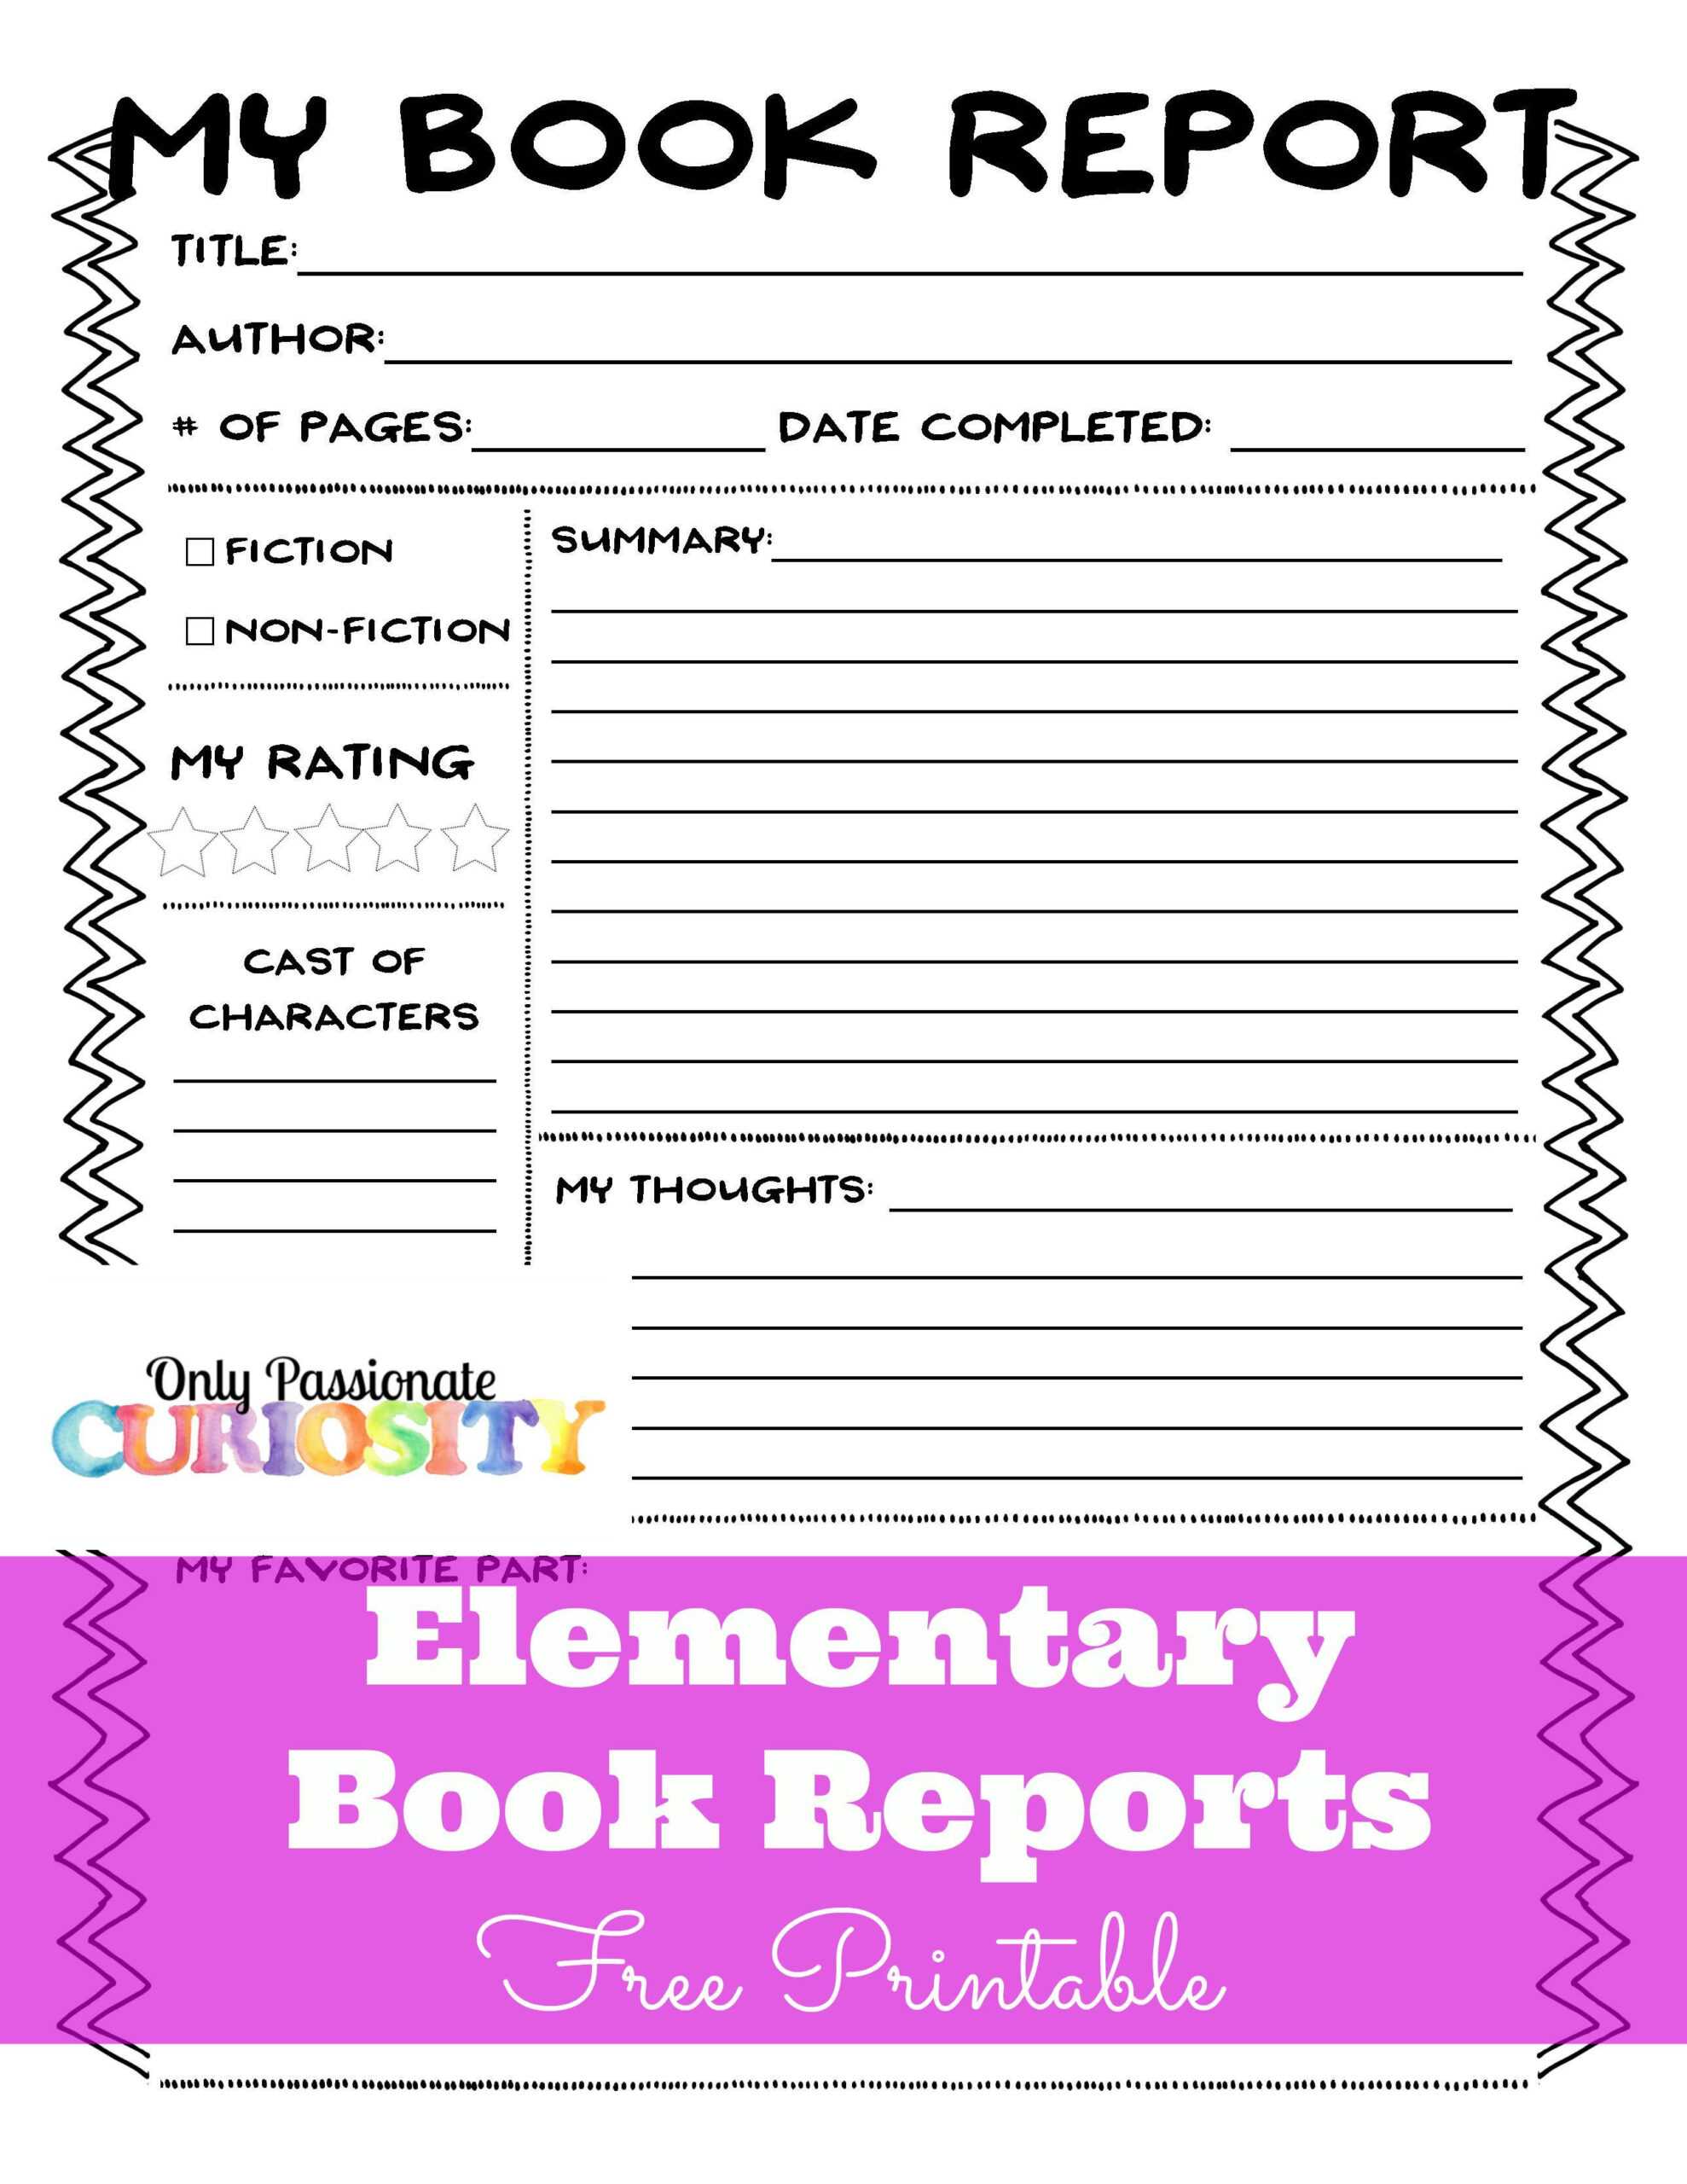 Elementary Book Reports Made Easy | Book Report Templates Throughout Book Report Template In Spanish